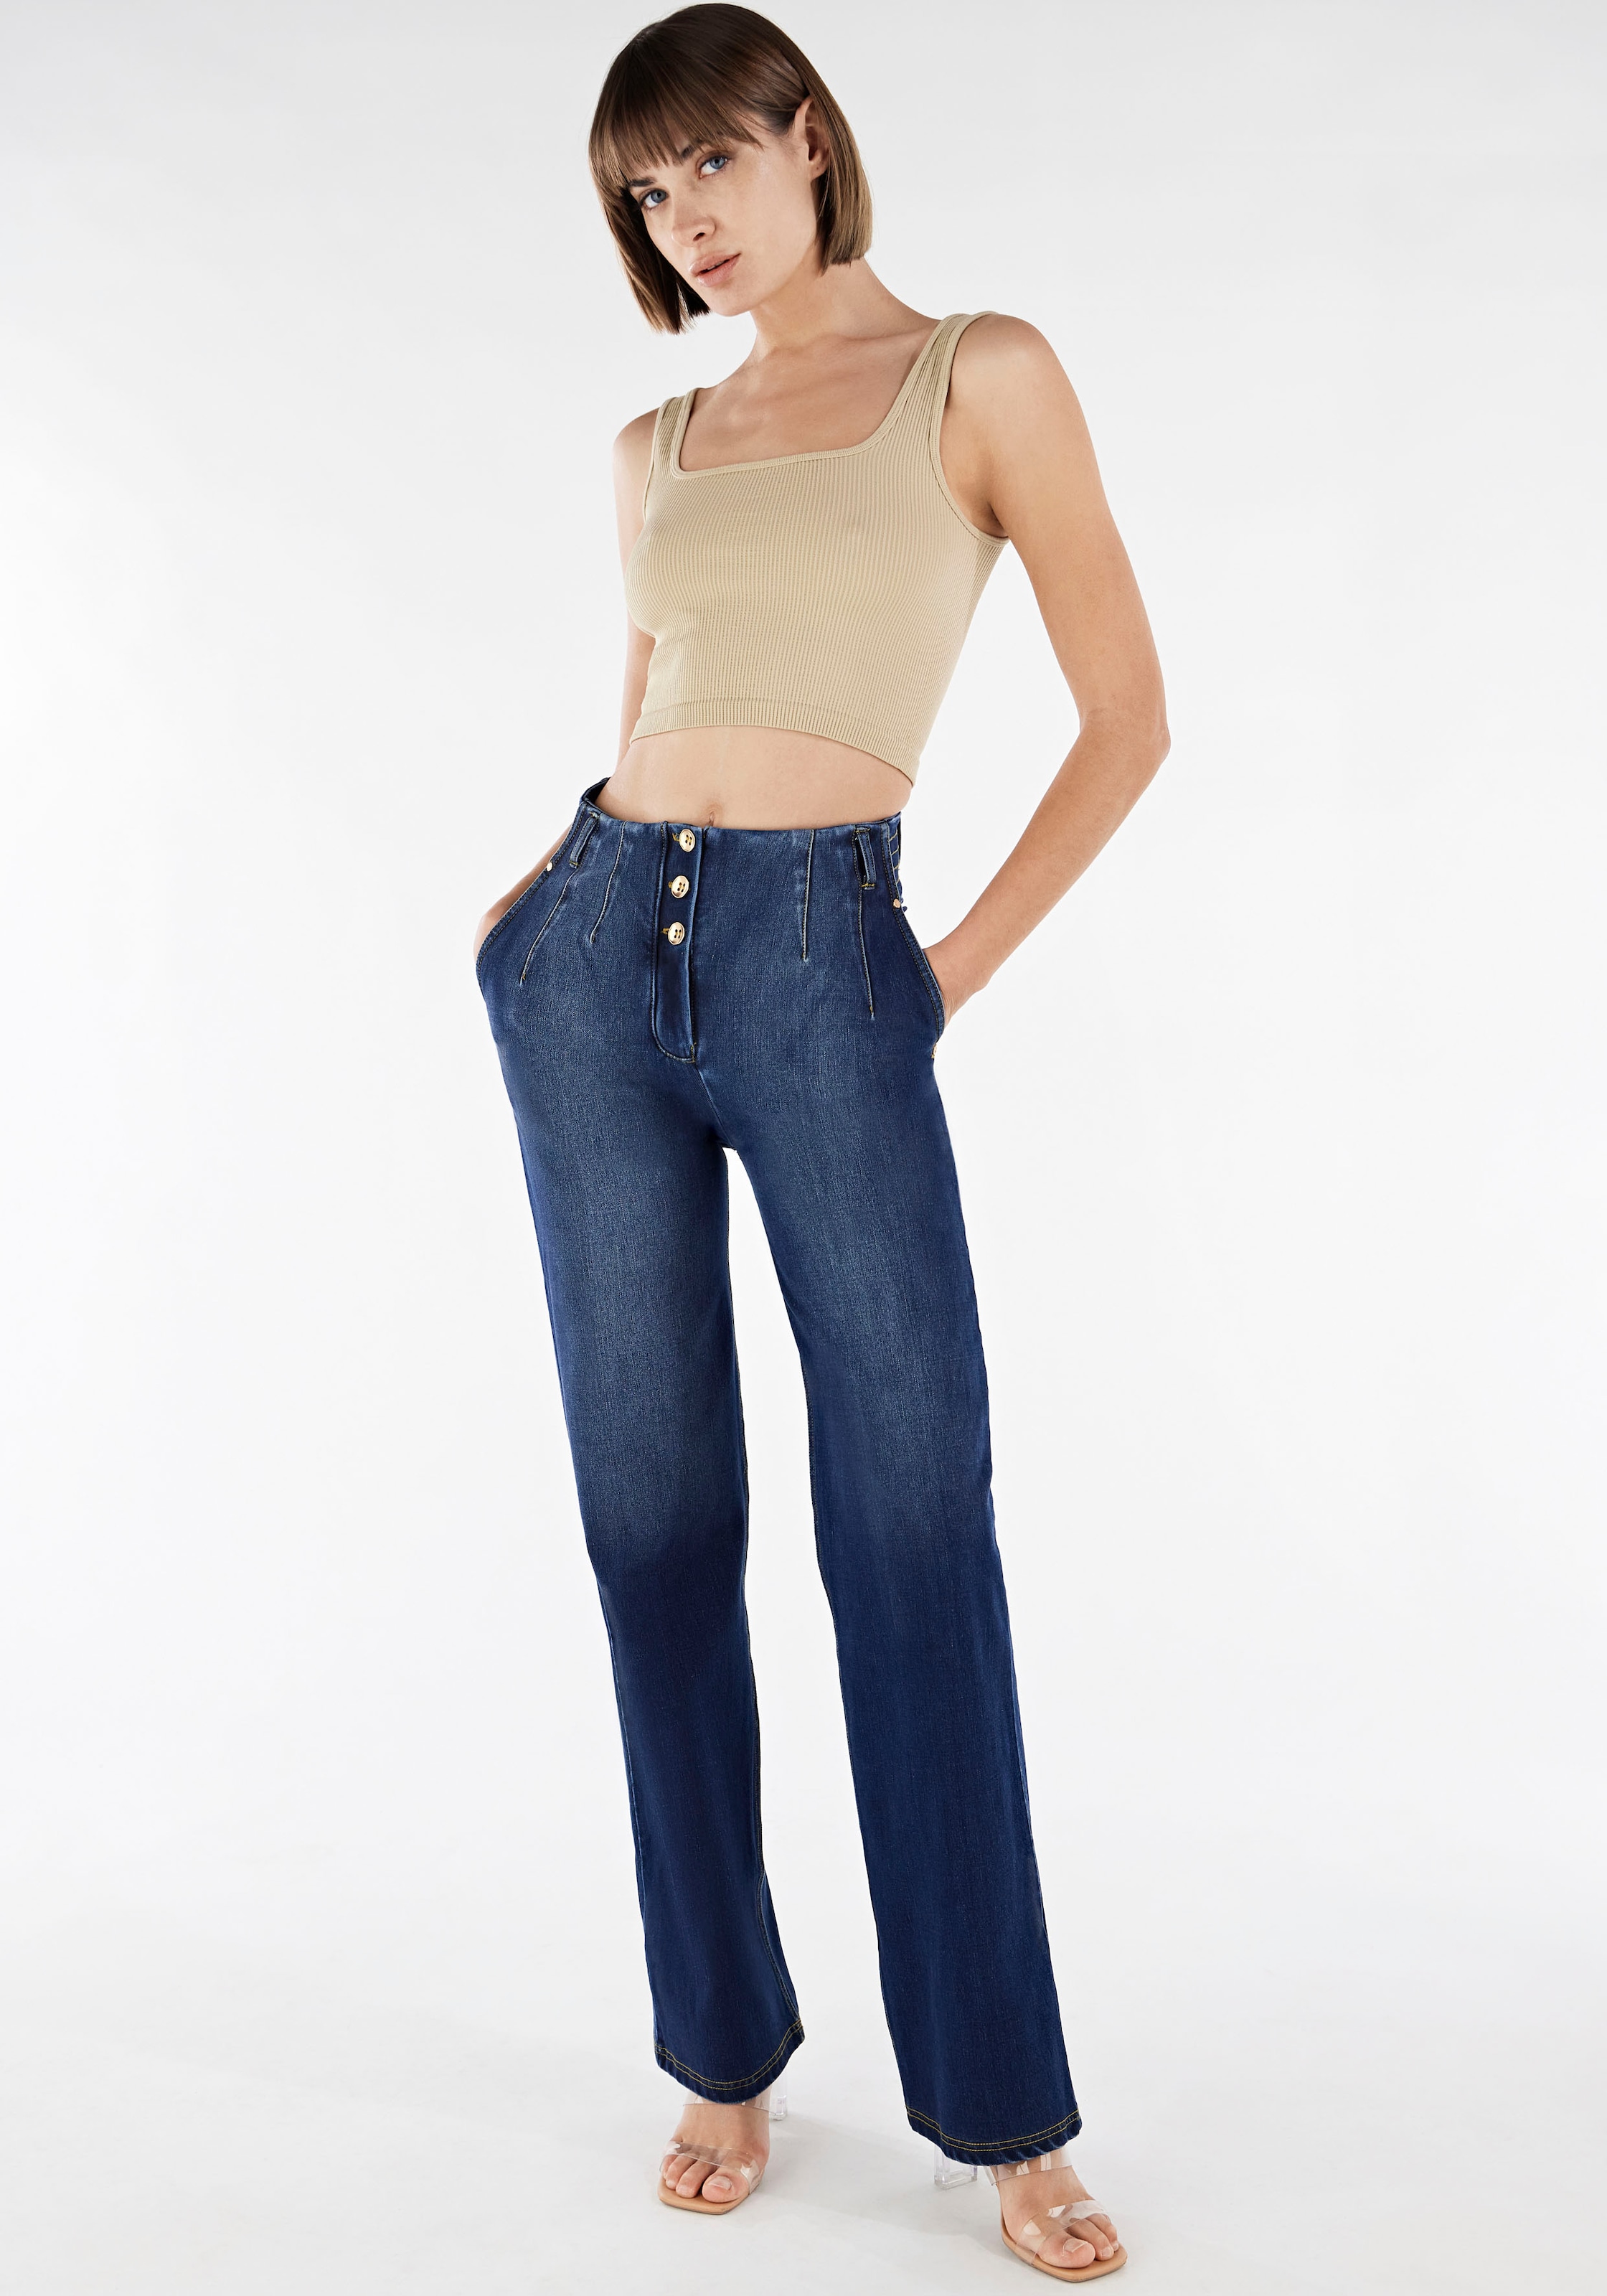 bei Lifting OTTOversand mit Skinny-fit-Jeans Shaping »WRUP & Effekt Freddy SUPERSKINNY«,